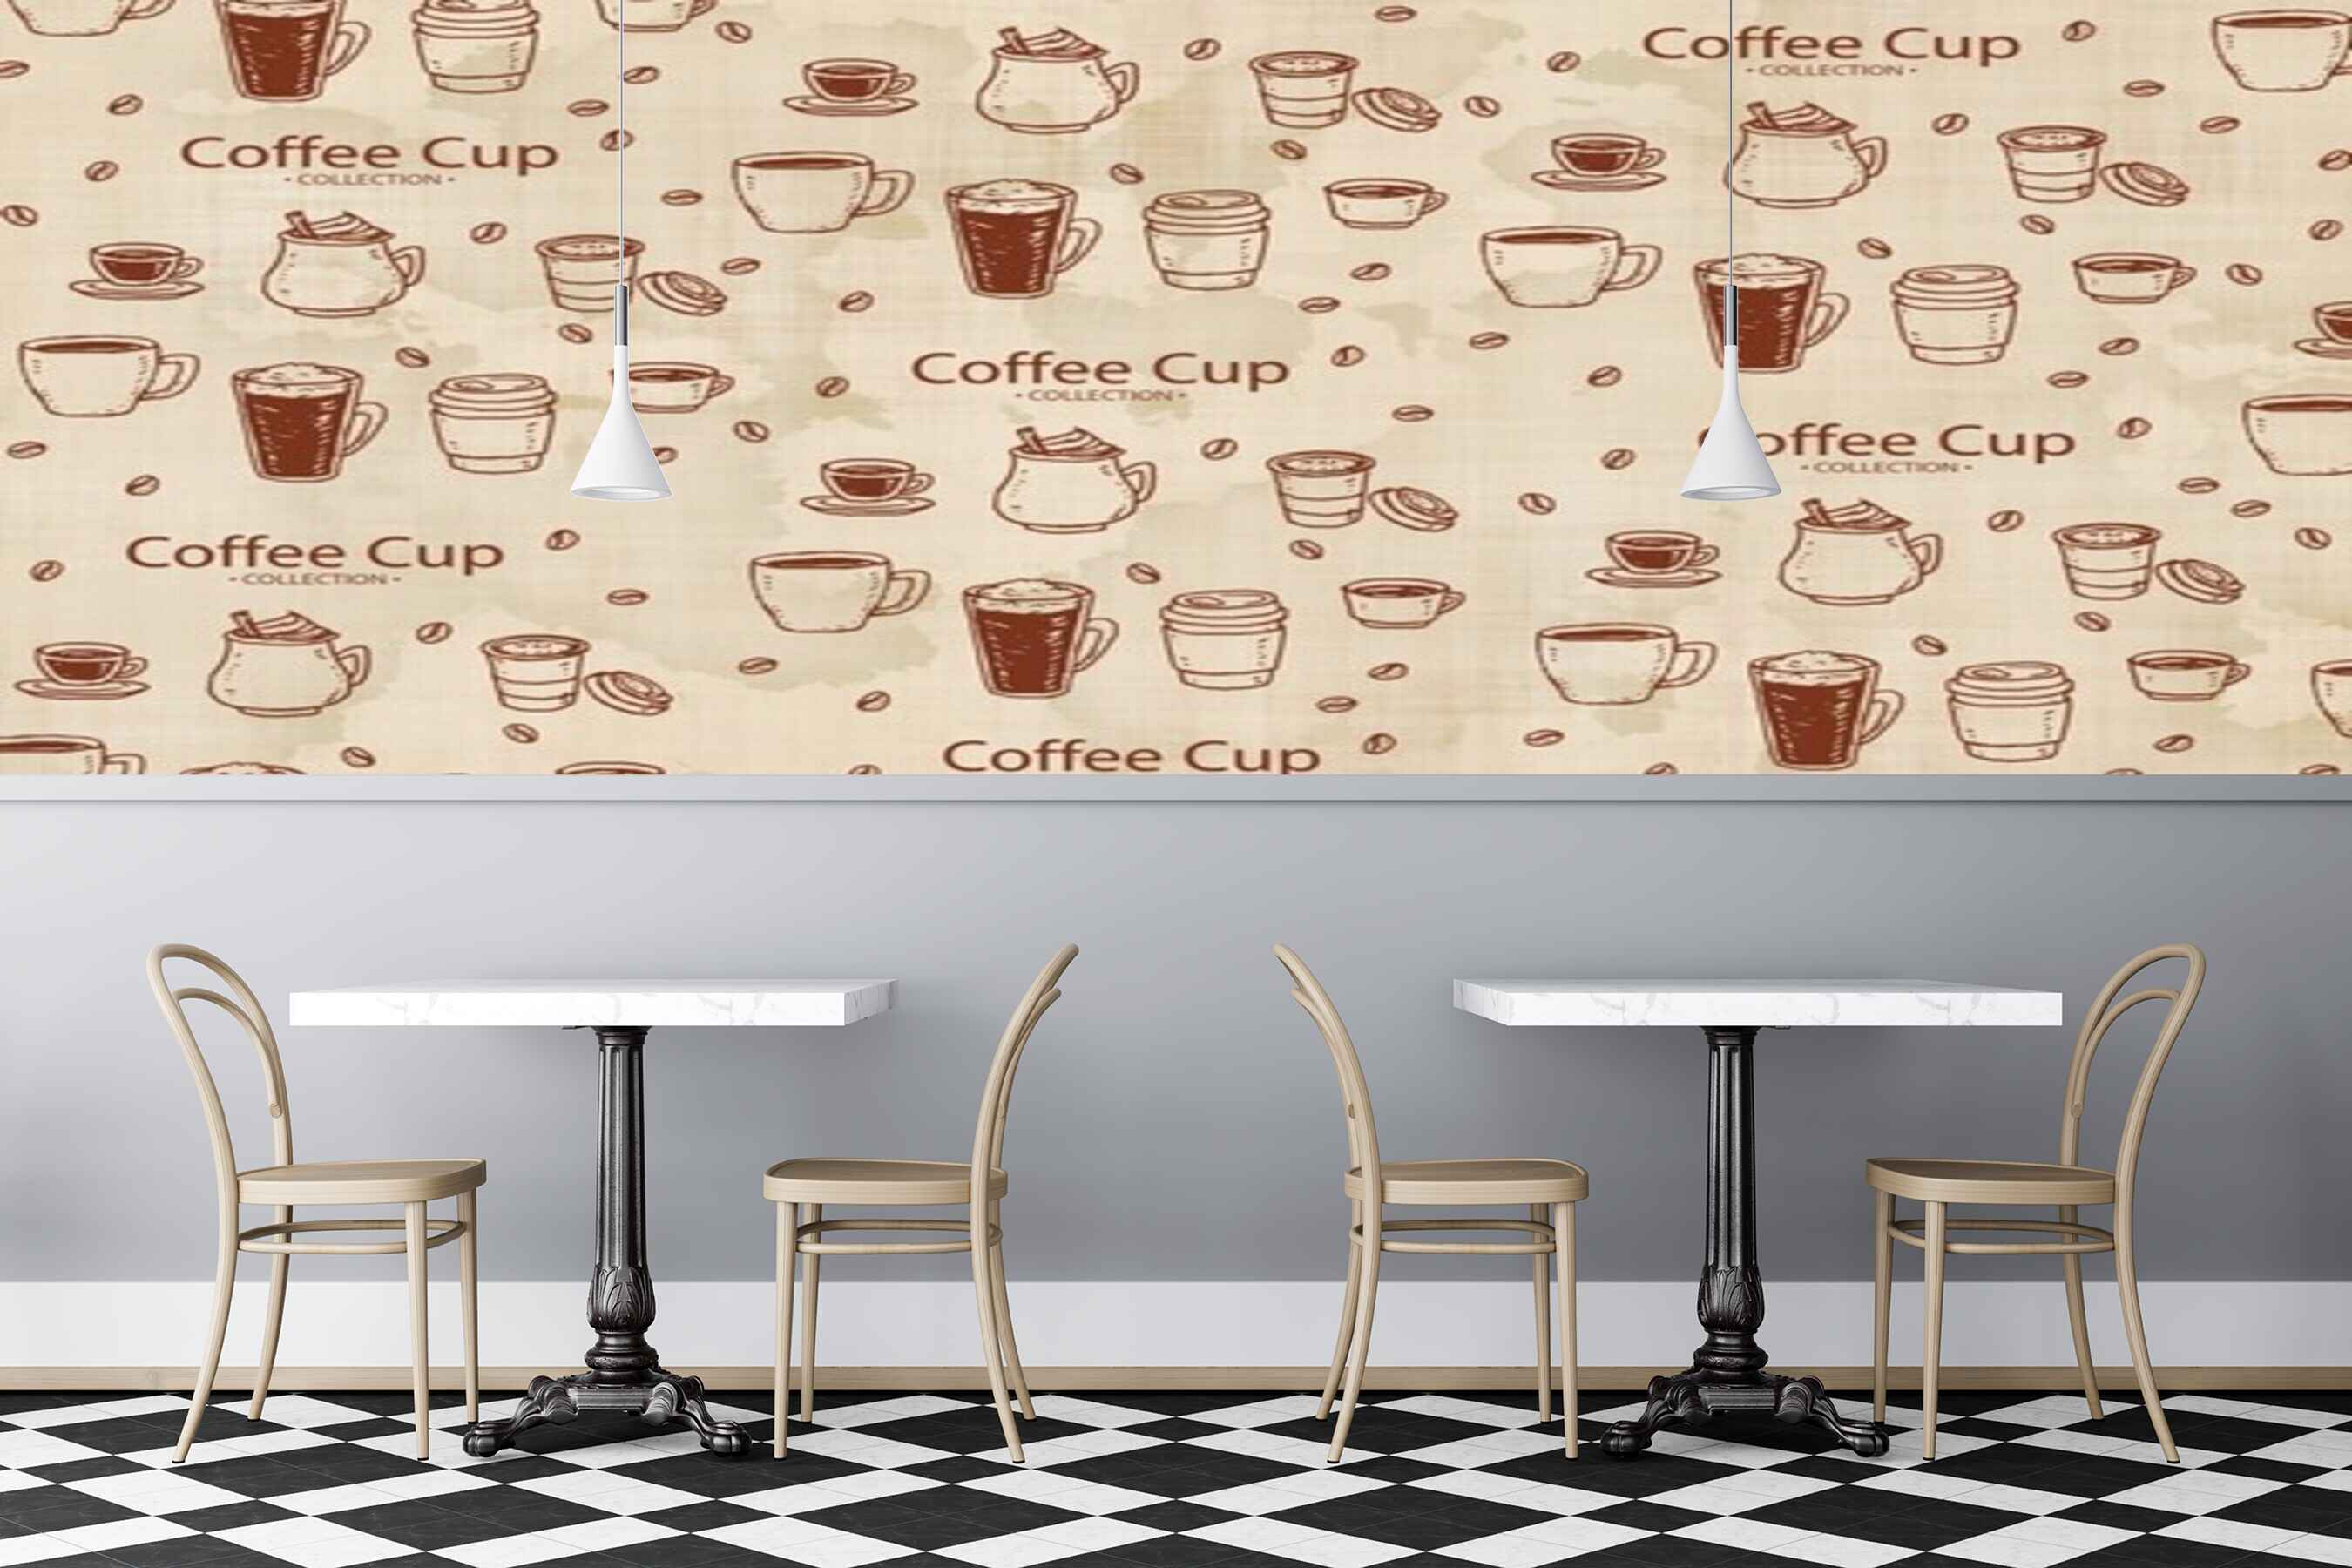 Avikalp MWZ3062 Coffe Cup Collection Mugs Drinks HD Wallpaper for Cafe Restaurant